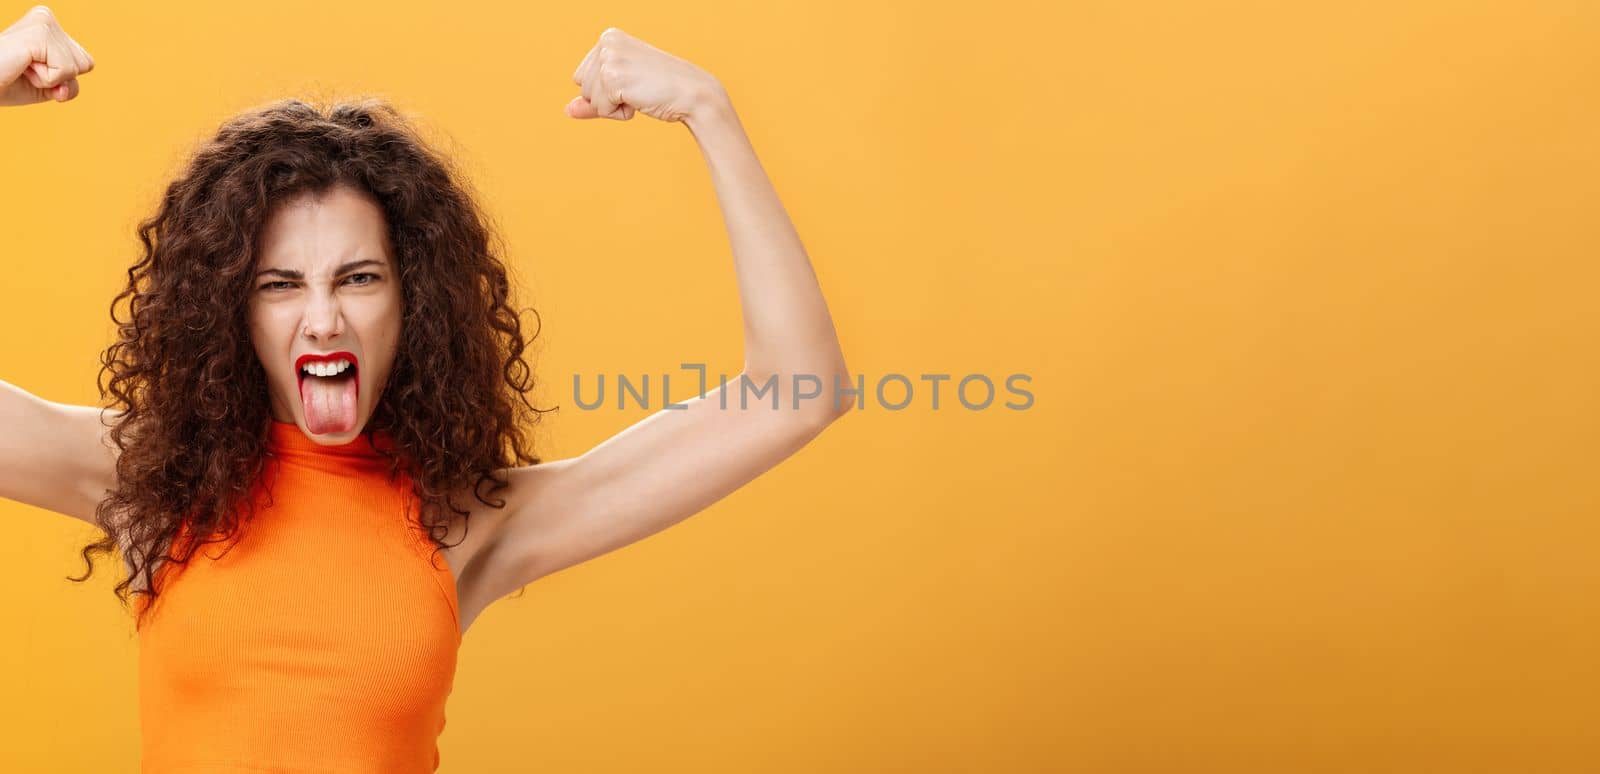 Waist-up shot of cool and daring caucasian female in orange top with tattoo on arm frowning making funny face sticking out tongue raising hands showing muscles feeling power and strengths. Copy space